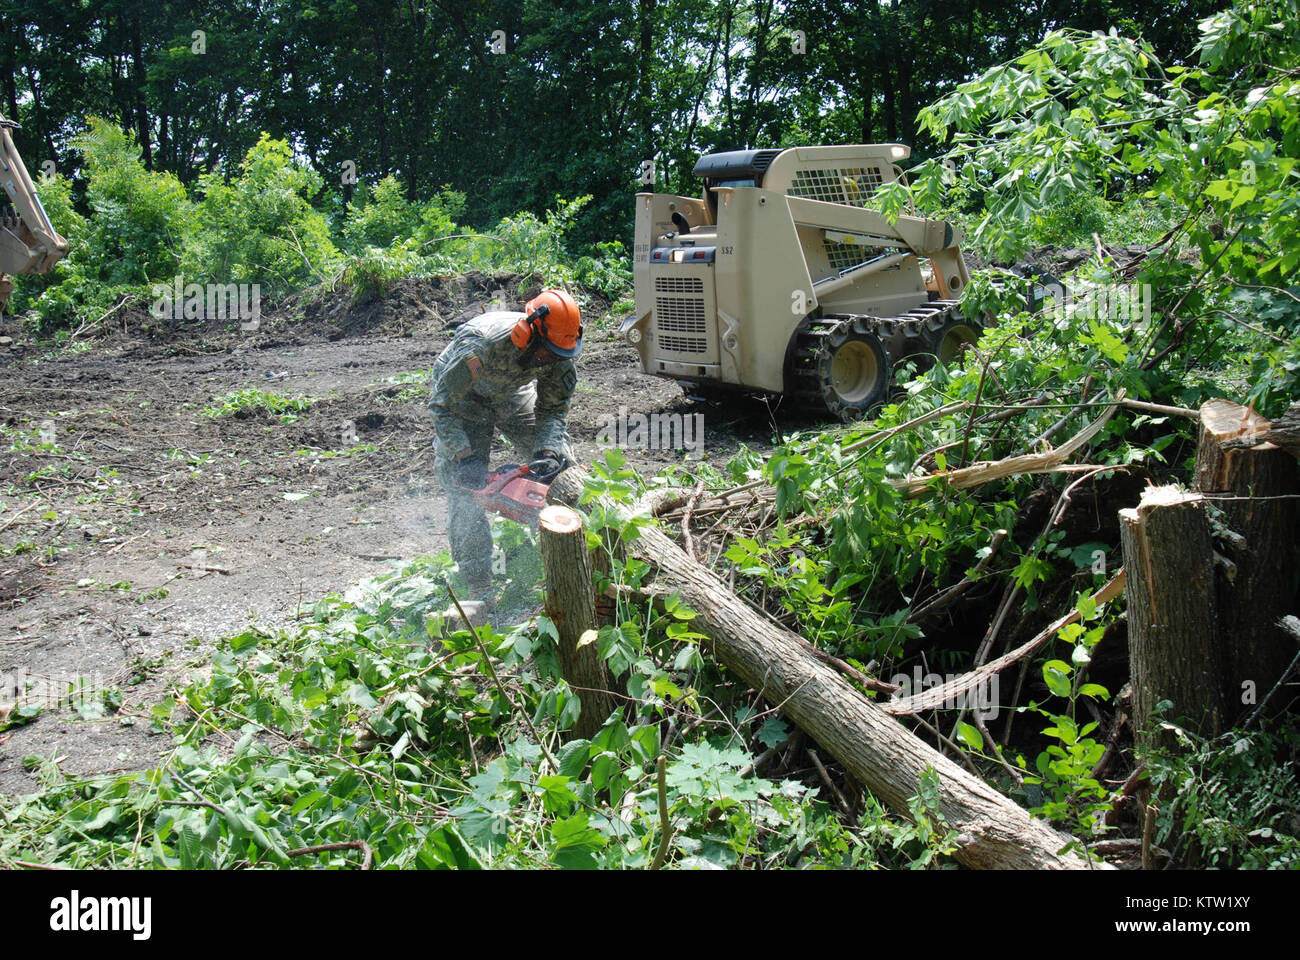 COHOES, N.Y. - Soldiers from New York Army National Guard's 1156th Engineer Battalion and 152nd Engineer Company leveled trees and removed tons of underbrush in the ruins of the Erie Canal located in the center of the City of Cohoes on June 11 as part of a trail-clearing process. The Soldiers were conducting innovative readiness training as part of their Annual Training.  Photo by Sgt. 1st Class Steven Petibone, New York Army National Guard Stock Photo